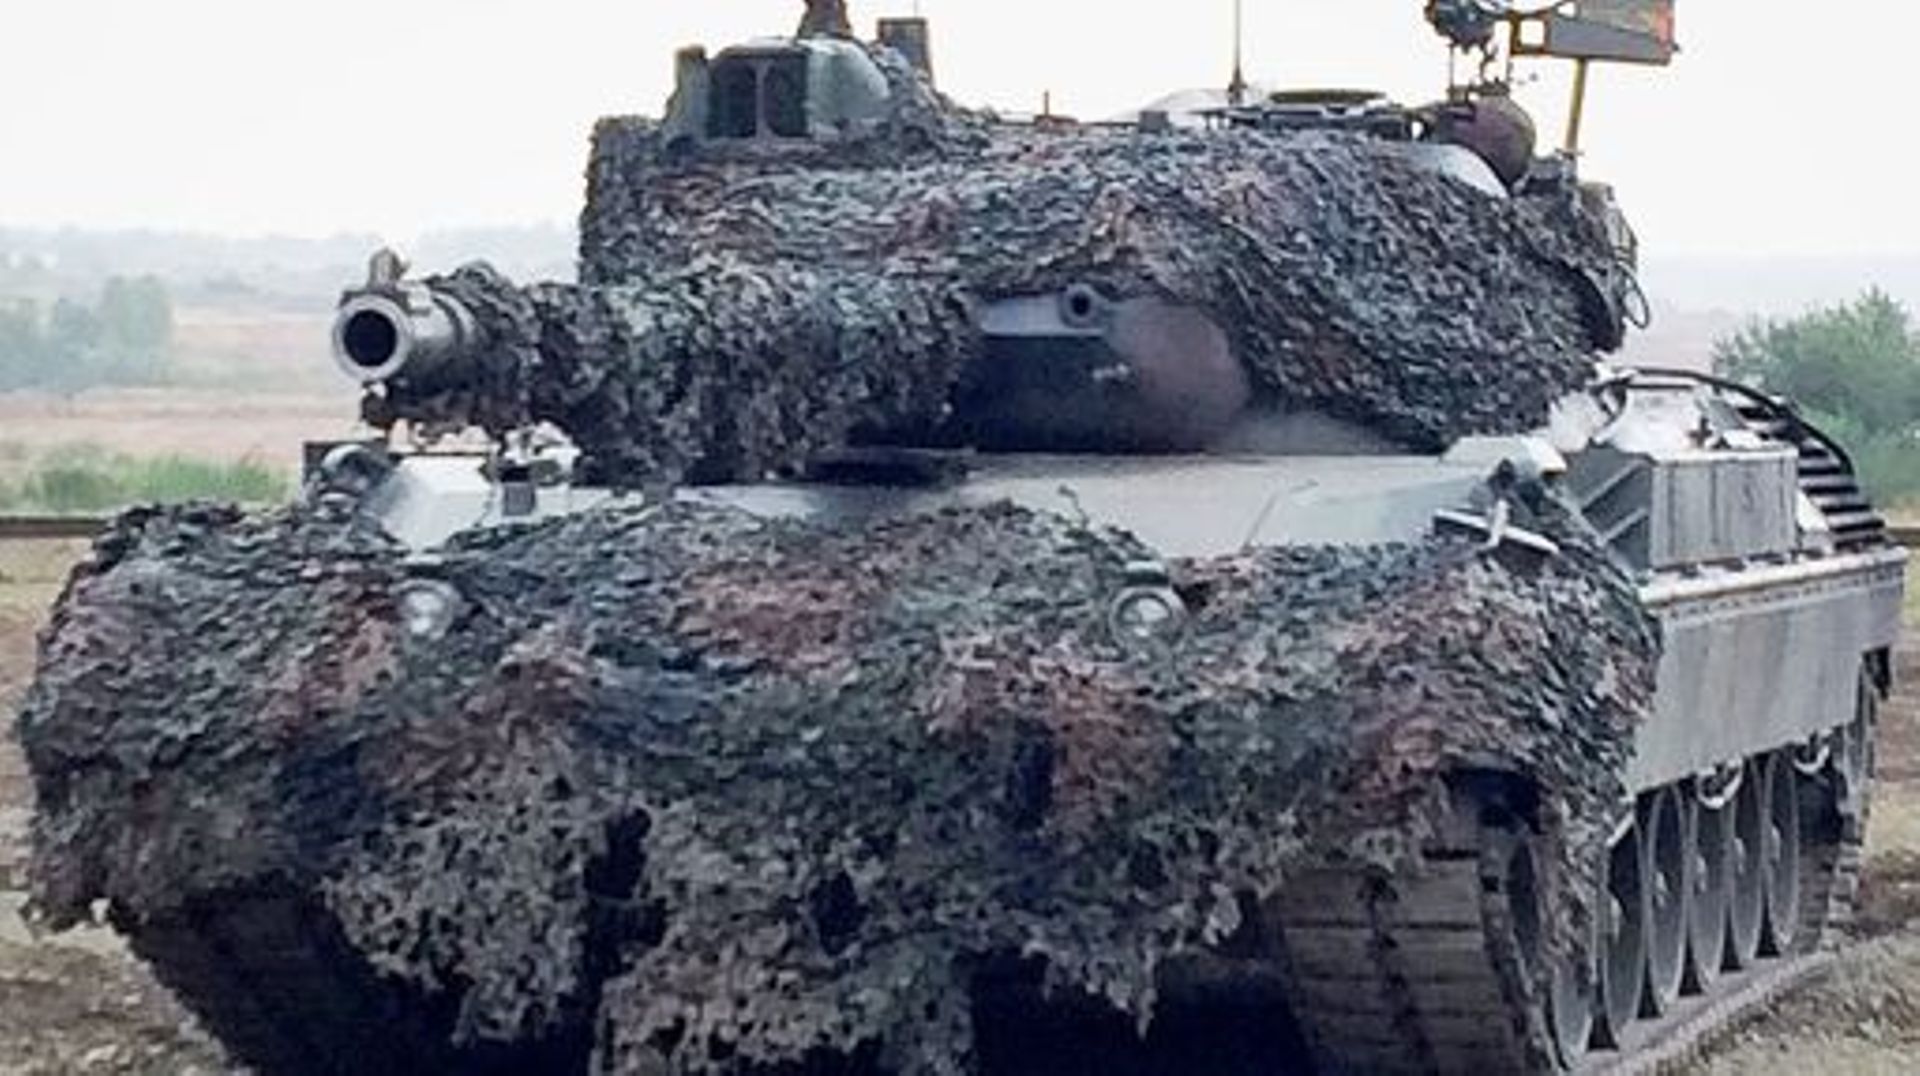 SMARTPHONE PICTURE – BEST QUALITY AVAILABLE 20140910 – BERGEN, GERMANY : Illustration picture shows a tank at the military base of Bergen-Hohne in Germany, during an NATO exercice, Wednesday 10 September 2014. Today will be the last shooting of a tank L